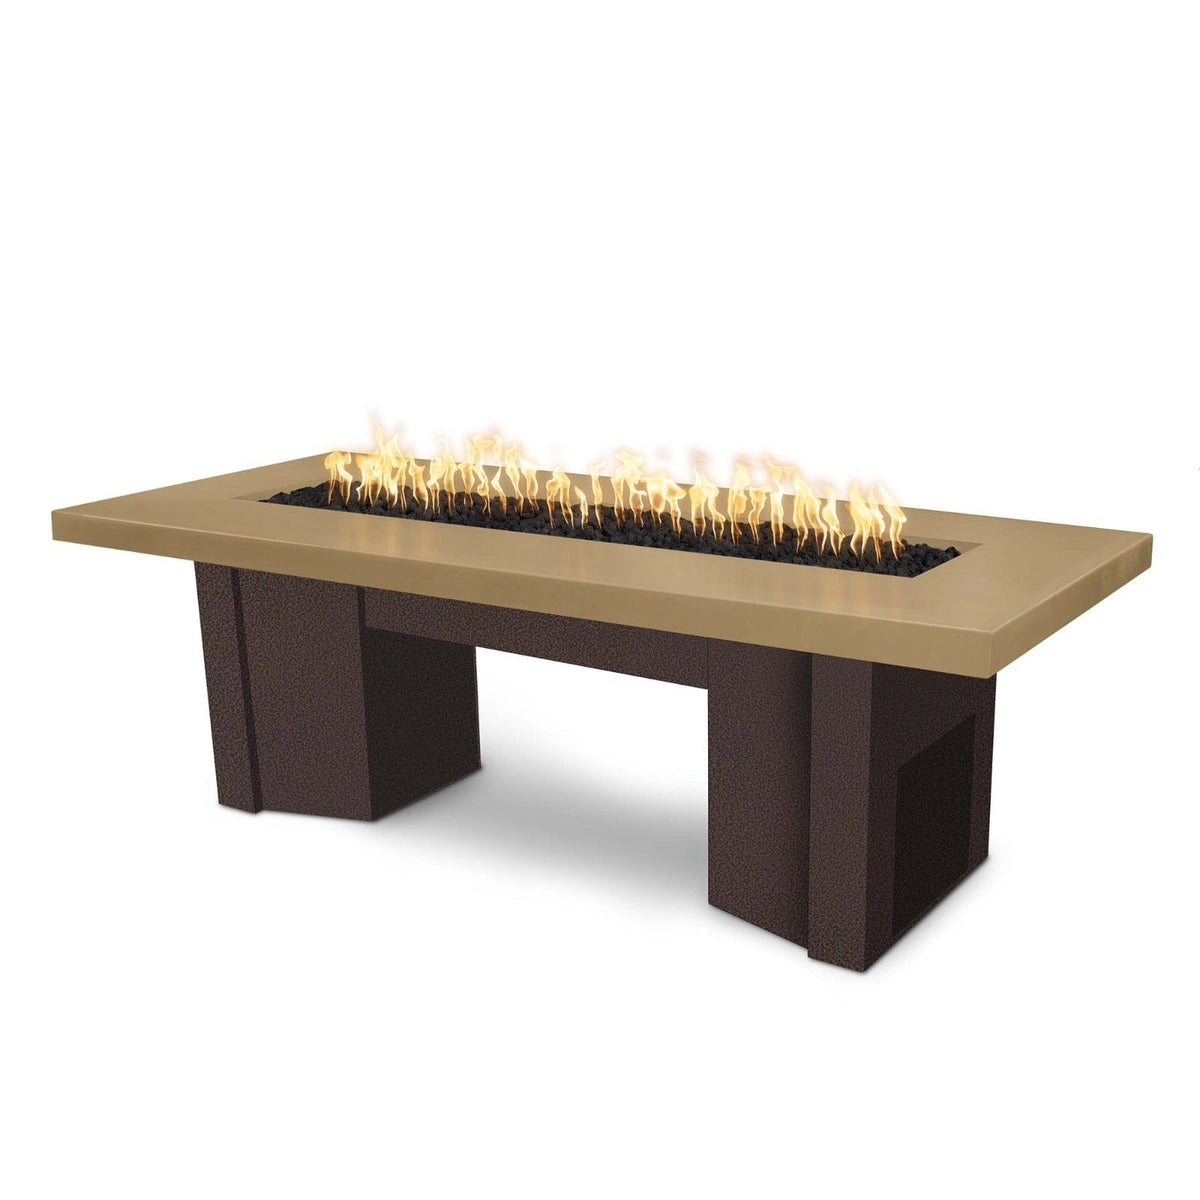 The Outdoor Plus Fire Features Brown (-BRN) / Copper Vein Powder Coated Steel (-CPV) The Outdoor Plus 78&quot; Alameda Fire Table Smooth Concrete in Liquid Propane - Flame Sense System with Push Button Spark Igniter / OPT-ALMGFRC78FSEN-LP